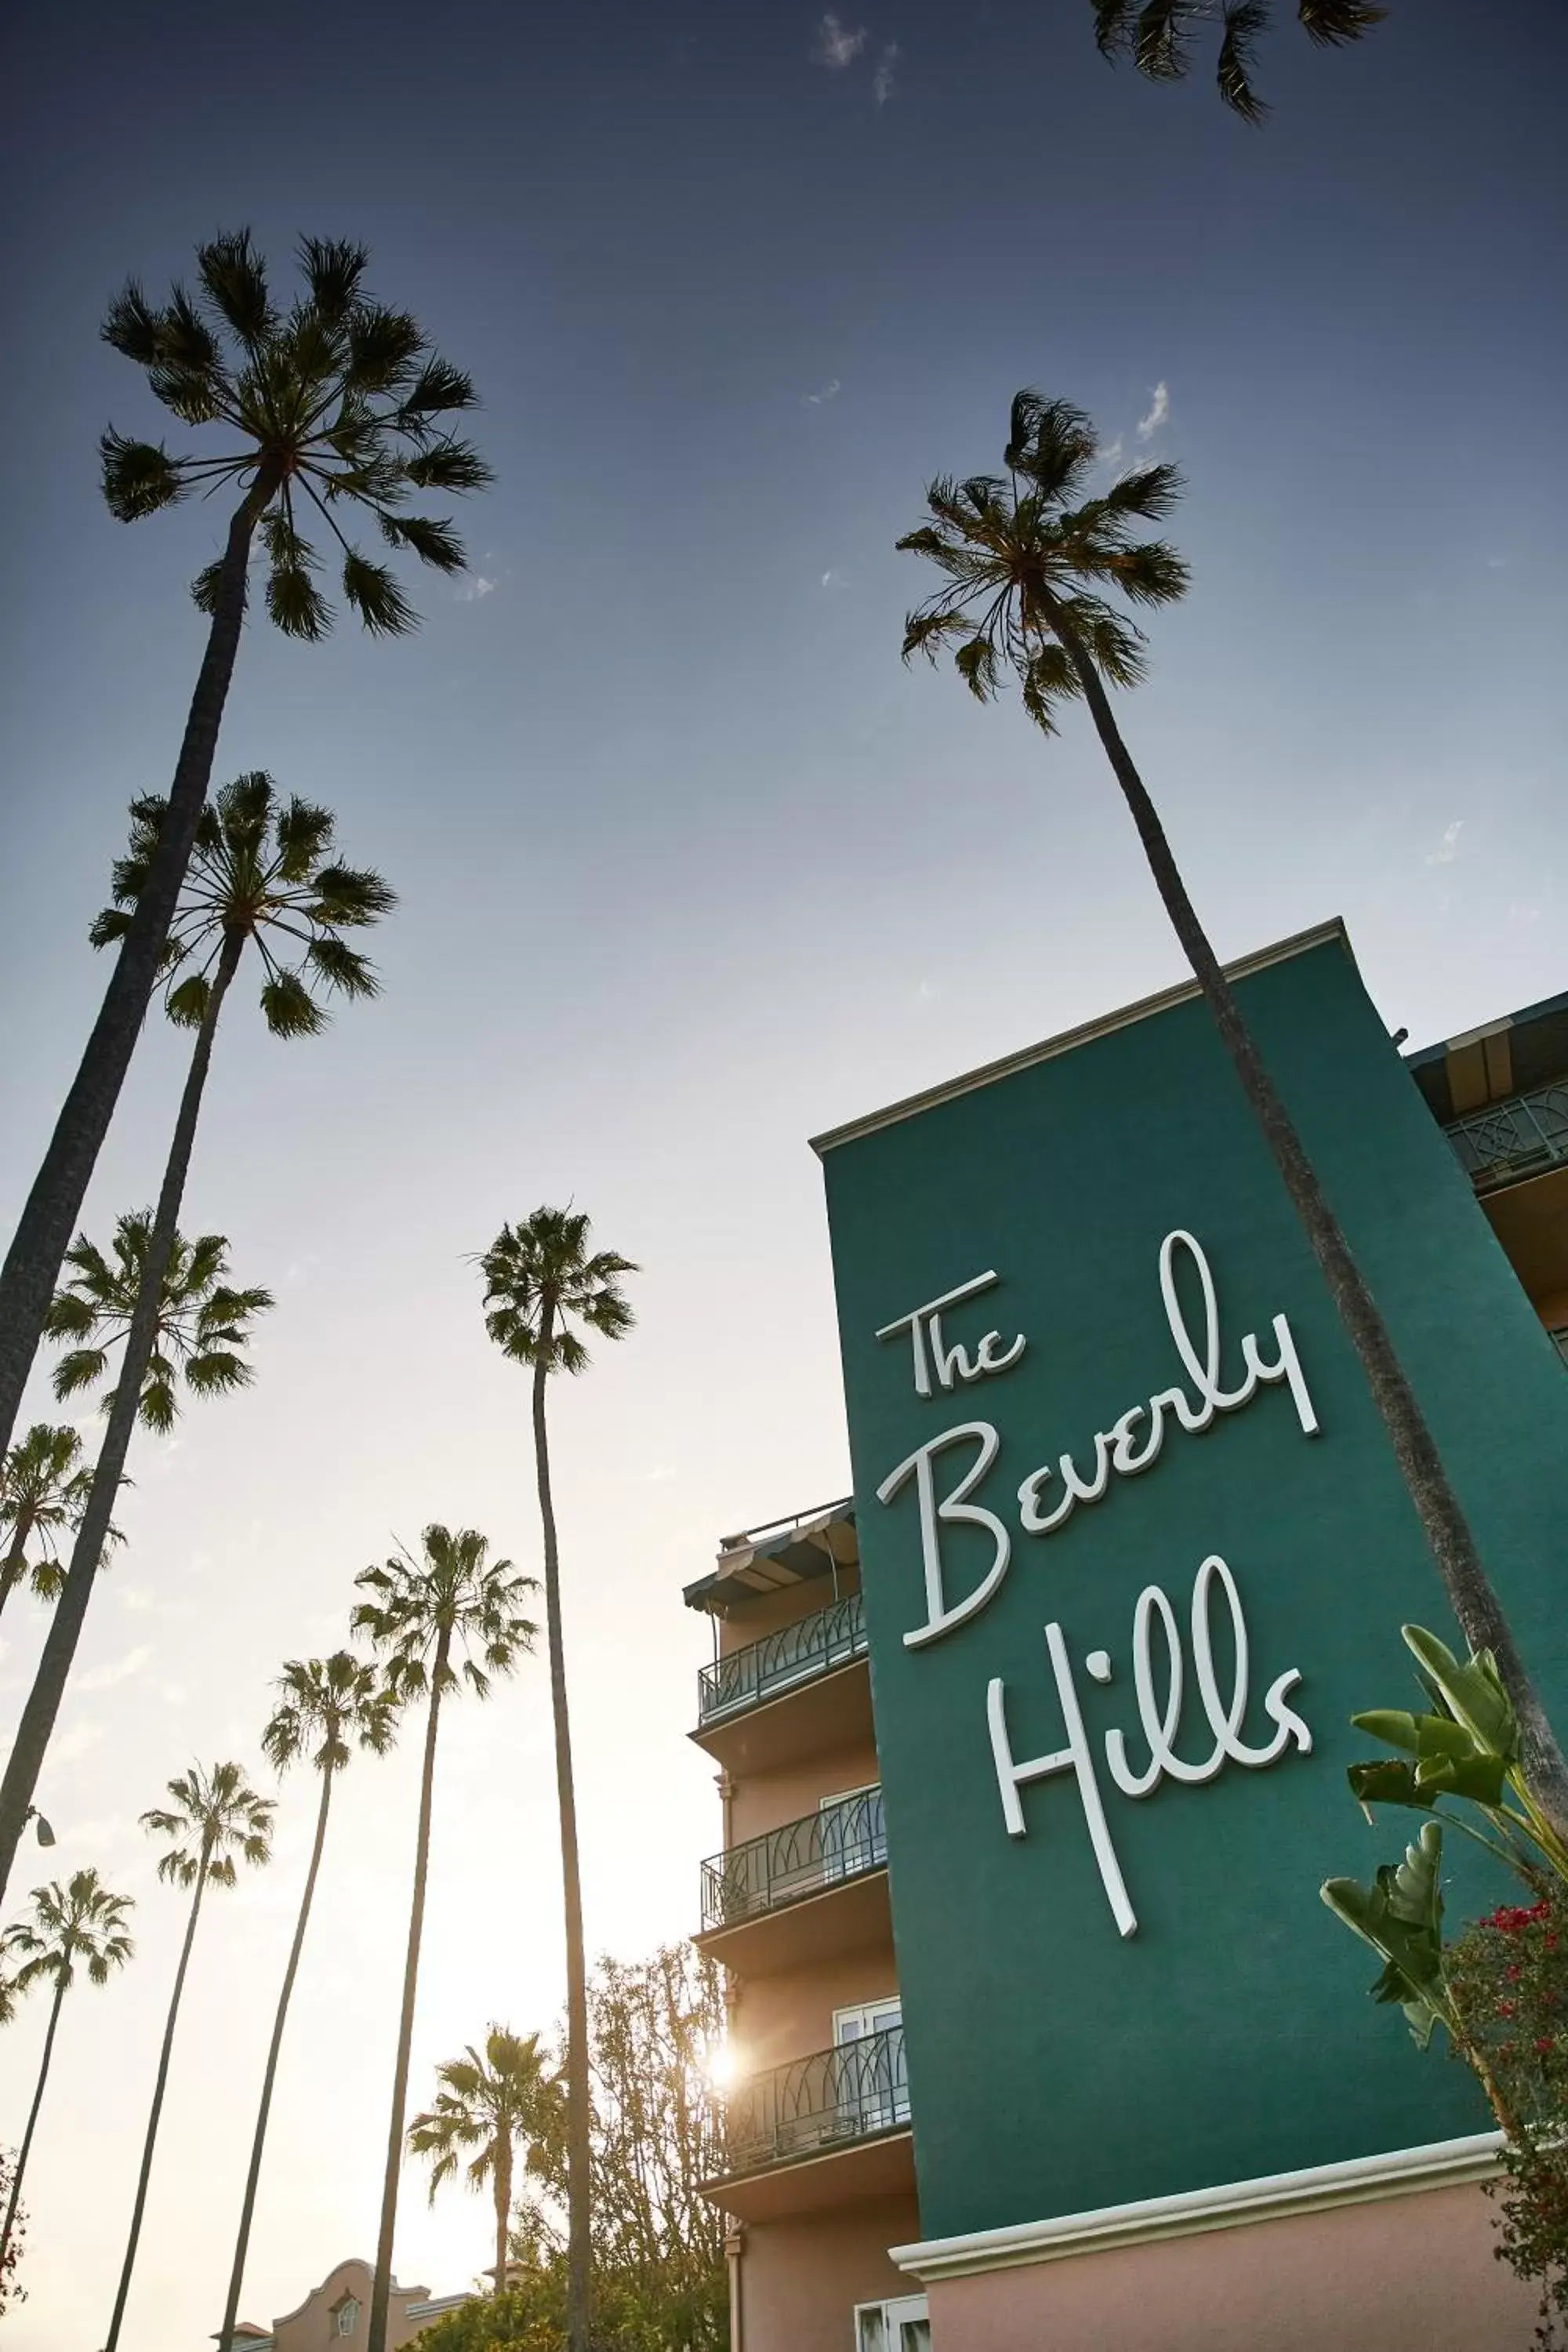 Property building in The Beverly Hills Hotel - Dorchester Collection